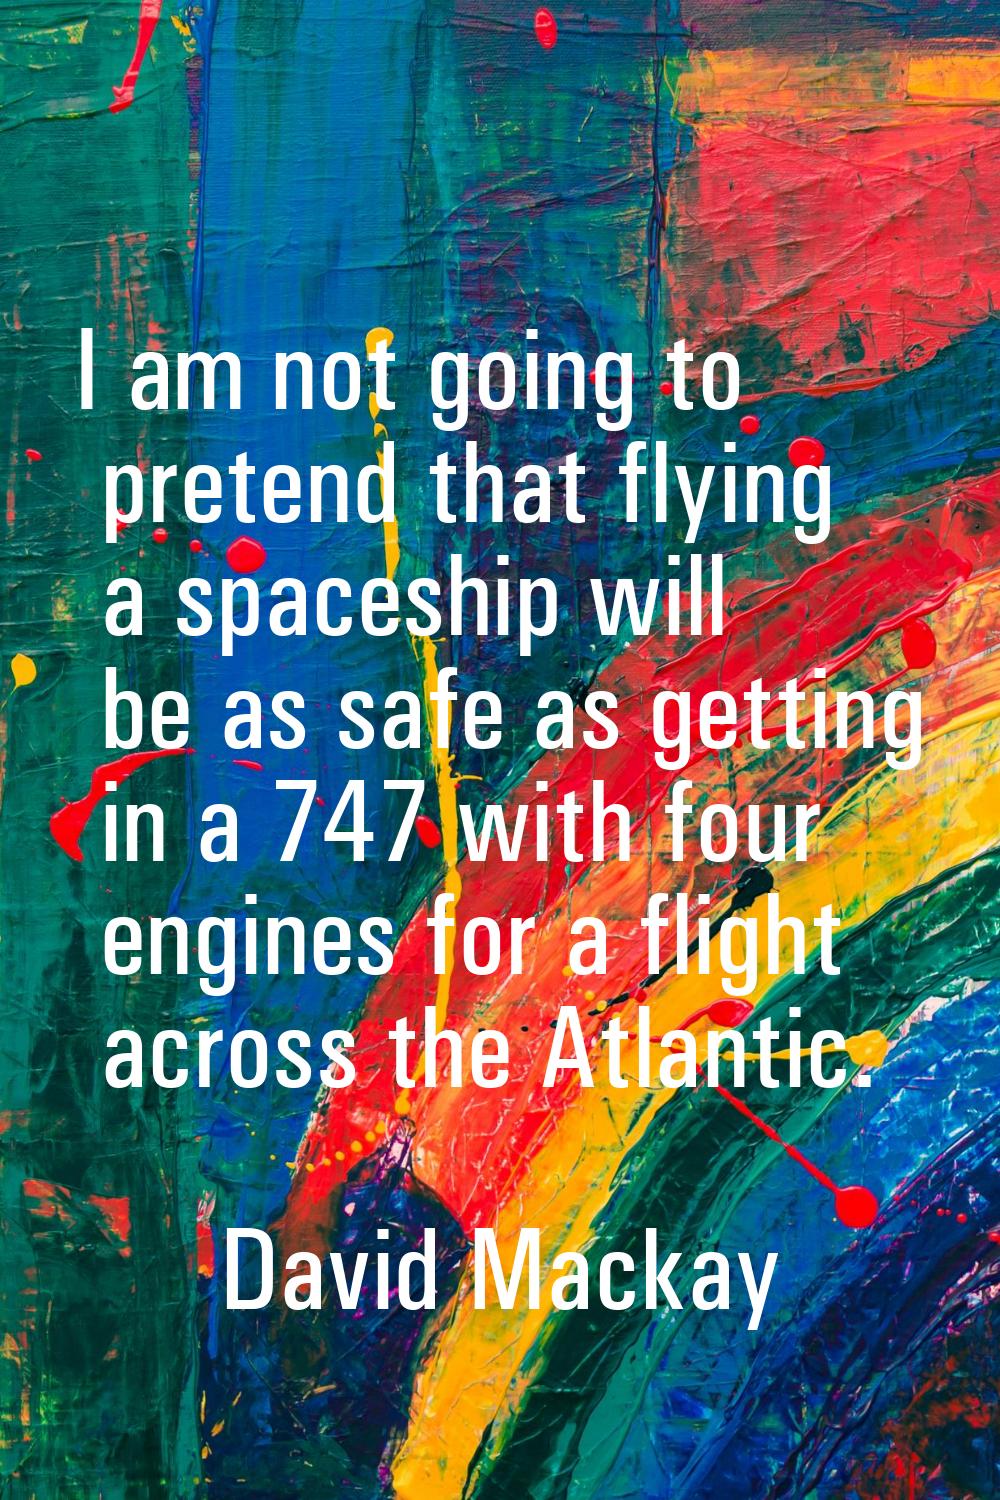 I am not going to pretend that flying a spaceship will be as safe as getting in a 747 with four eng